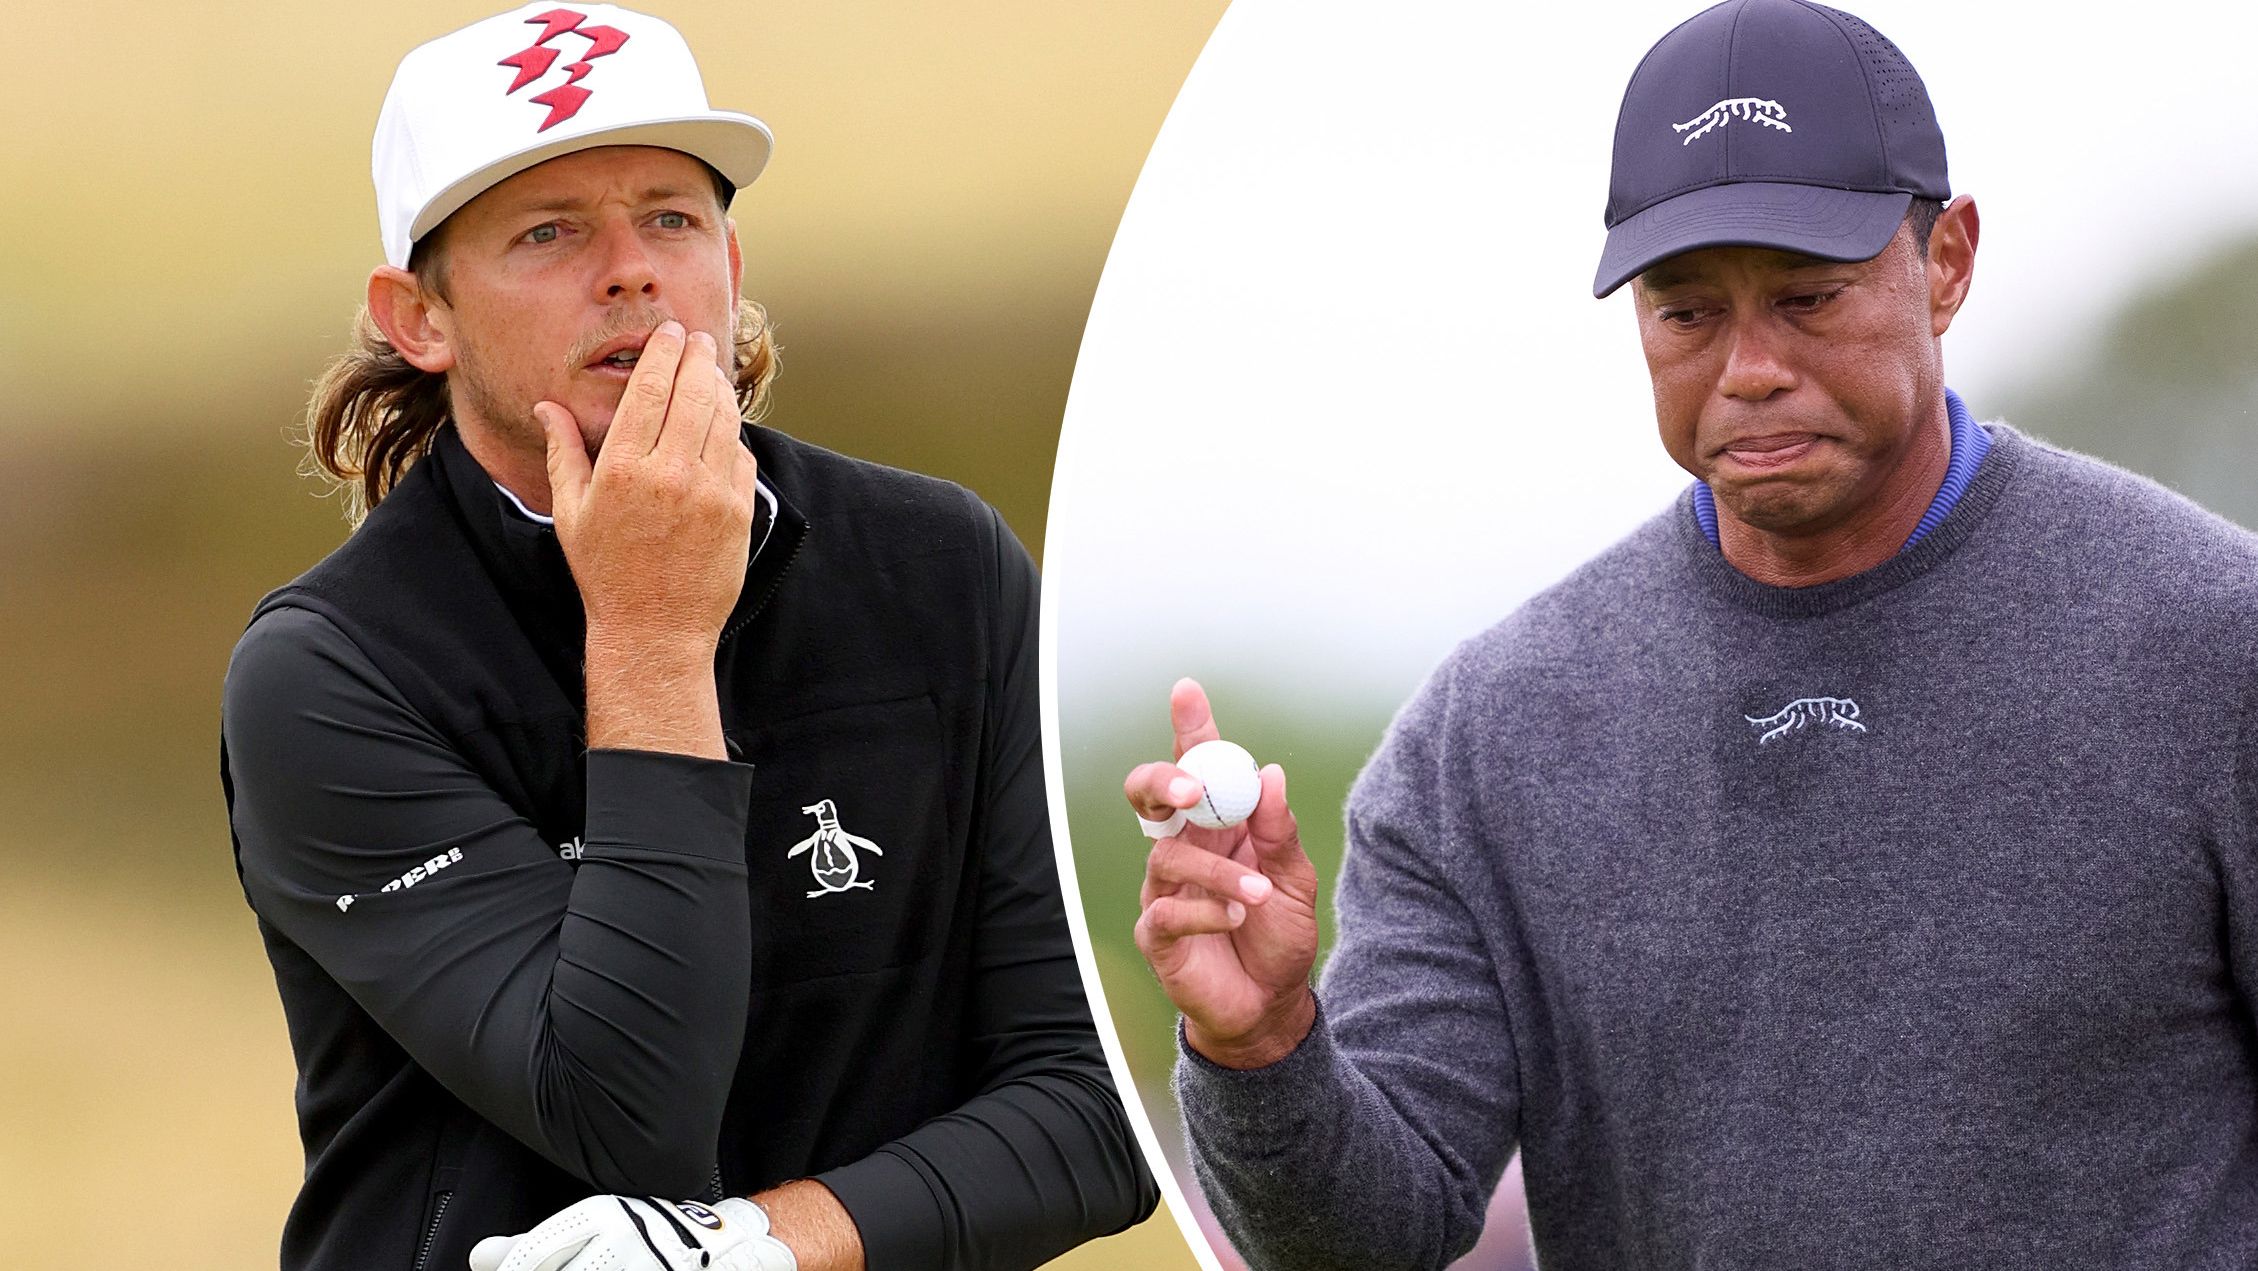 Cameron Smith and Tiger Woods stunk it up at the British Open.